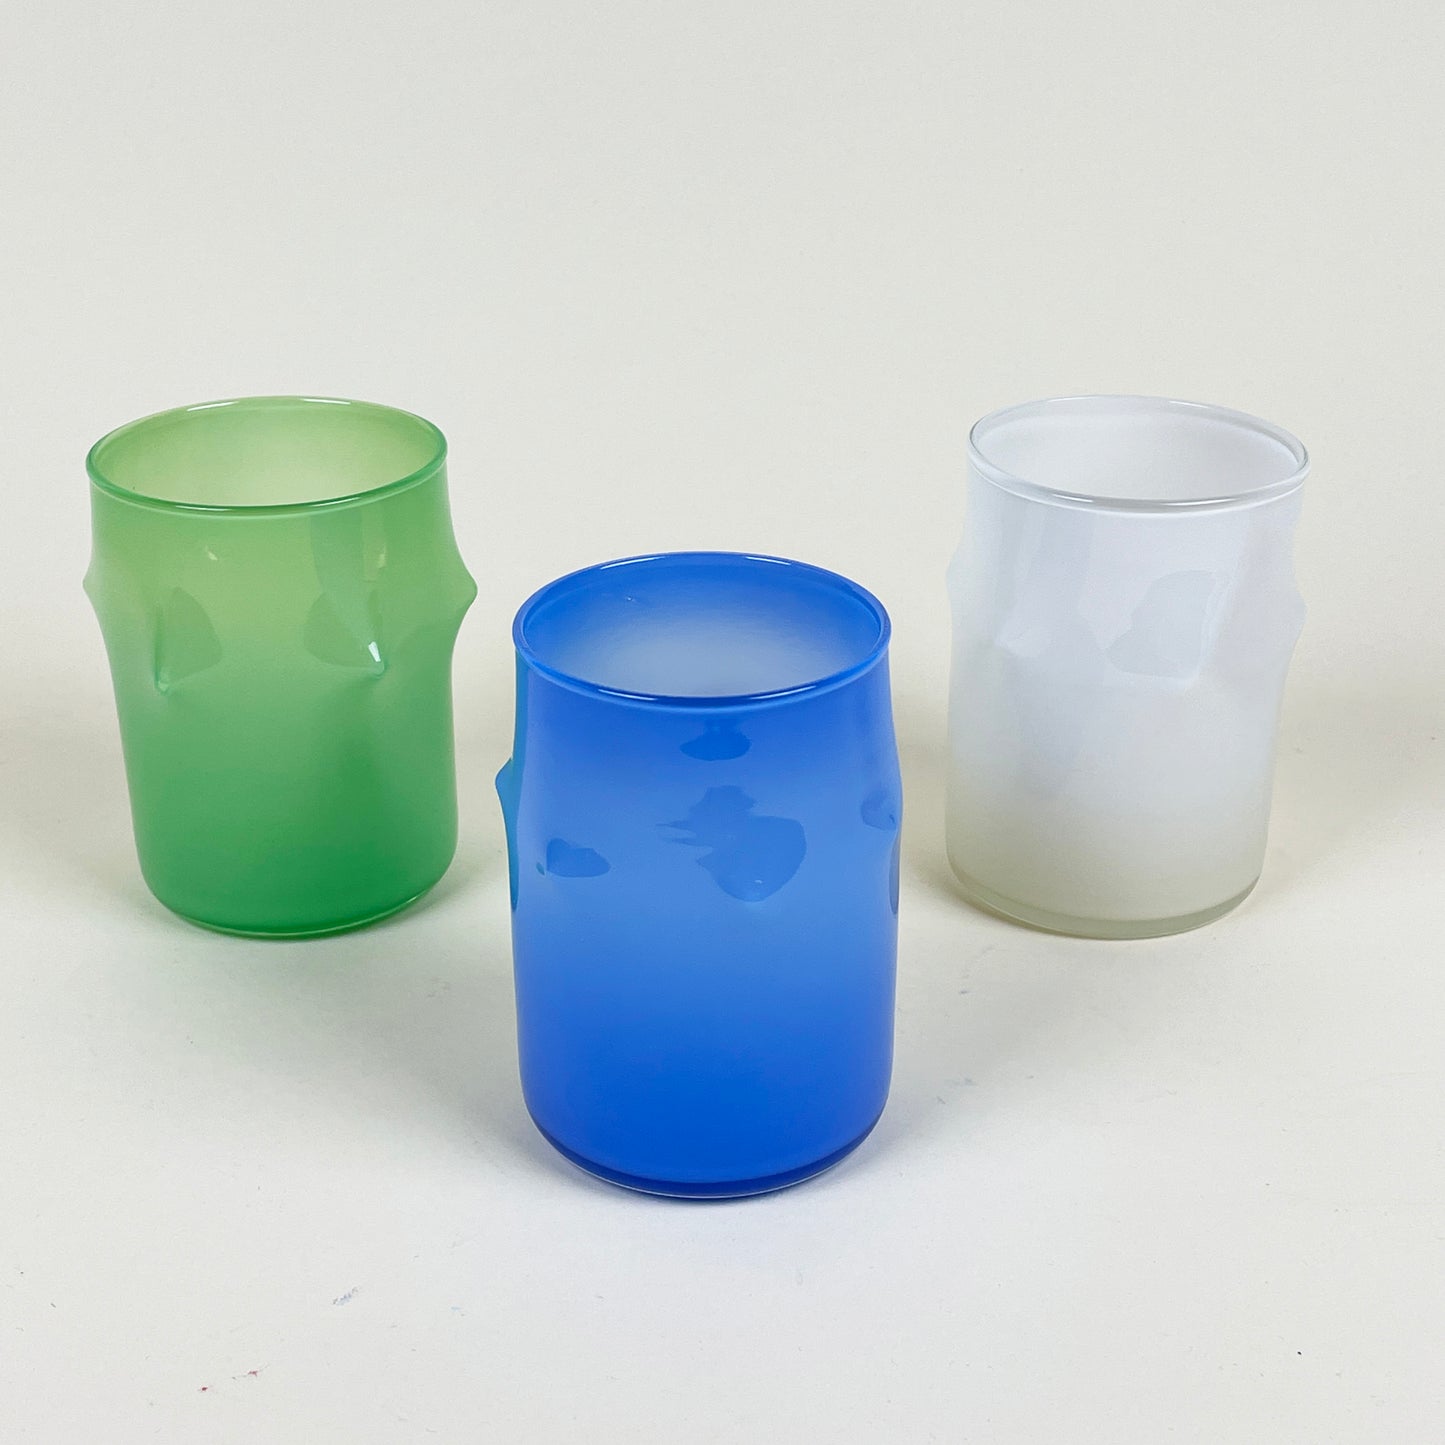 Drinking glass (green) by Silje Lindrup